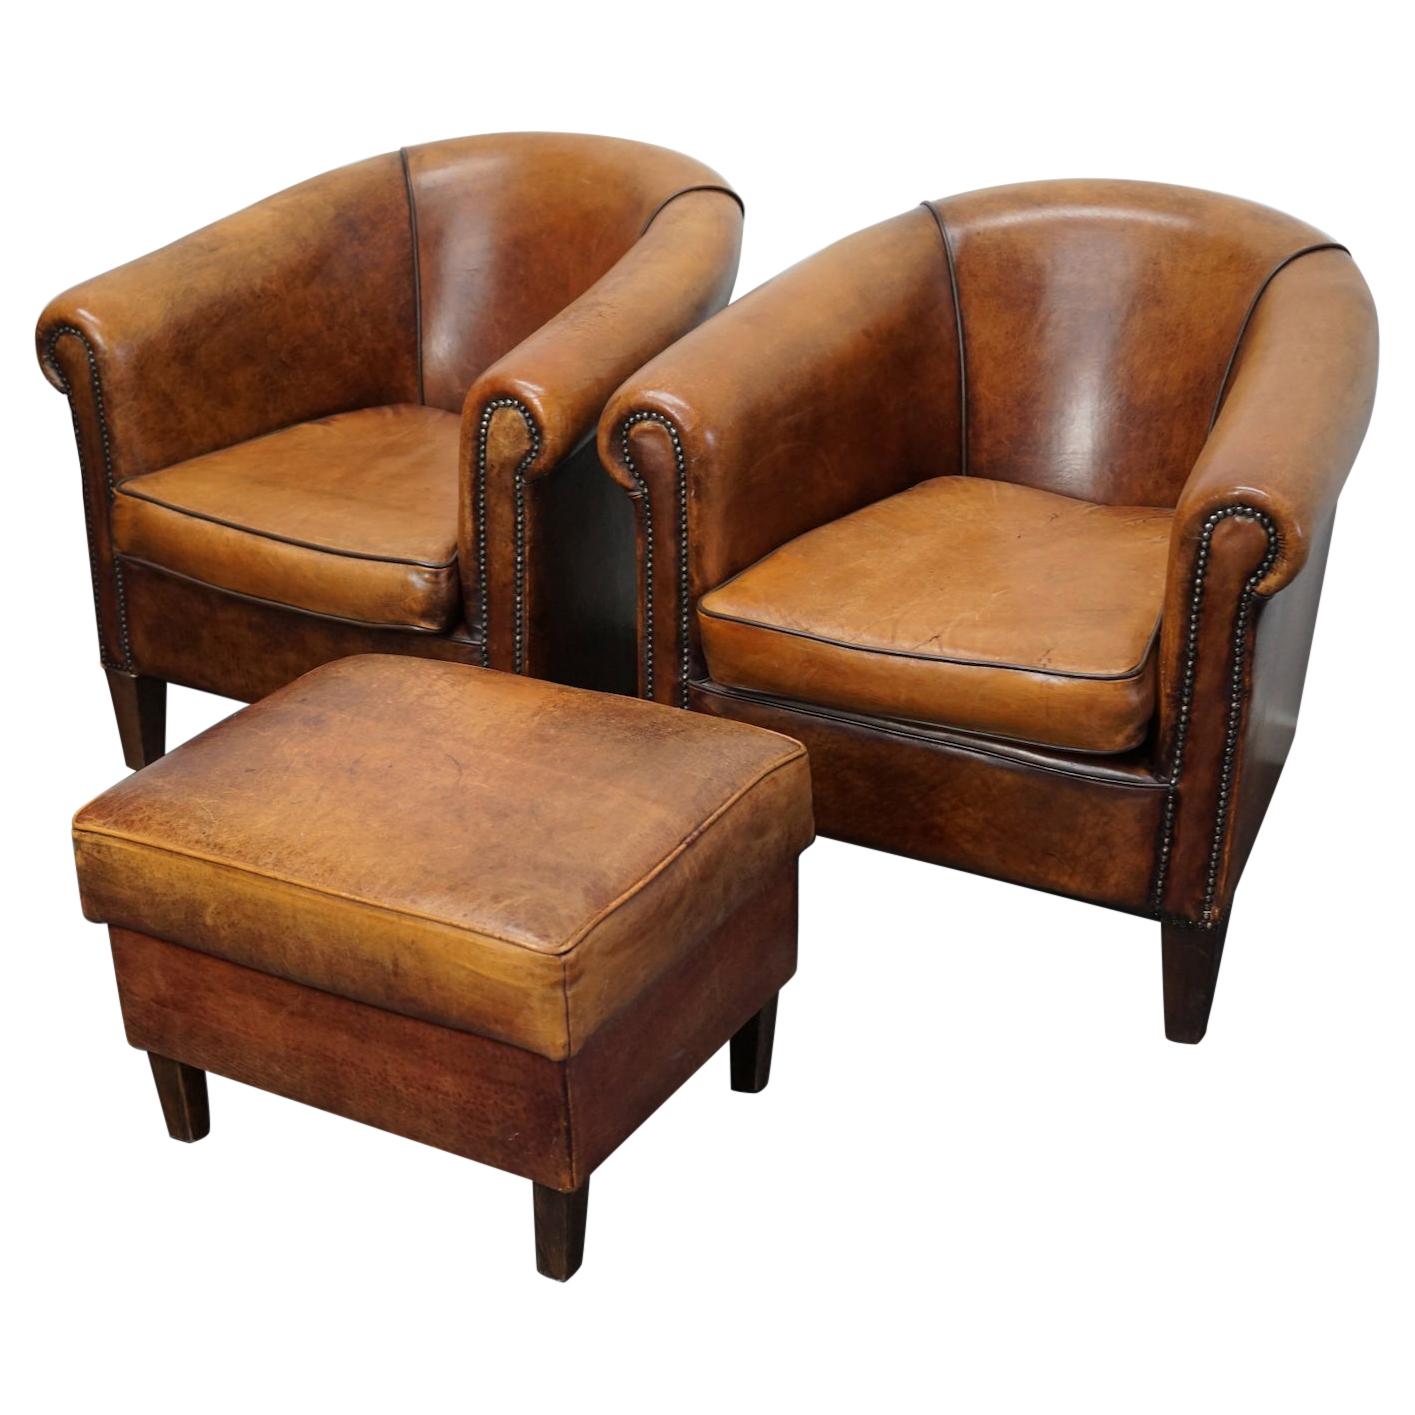 Vintage Dutch Cognac Leather Club Chairs, Set of 2 with Footstool